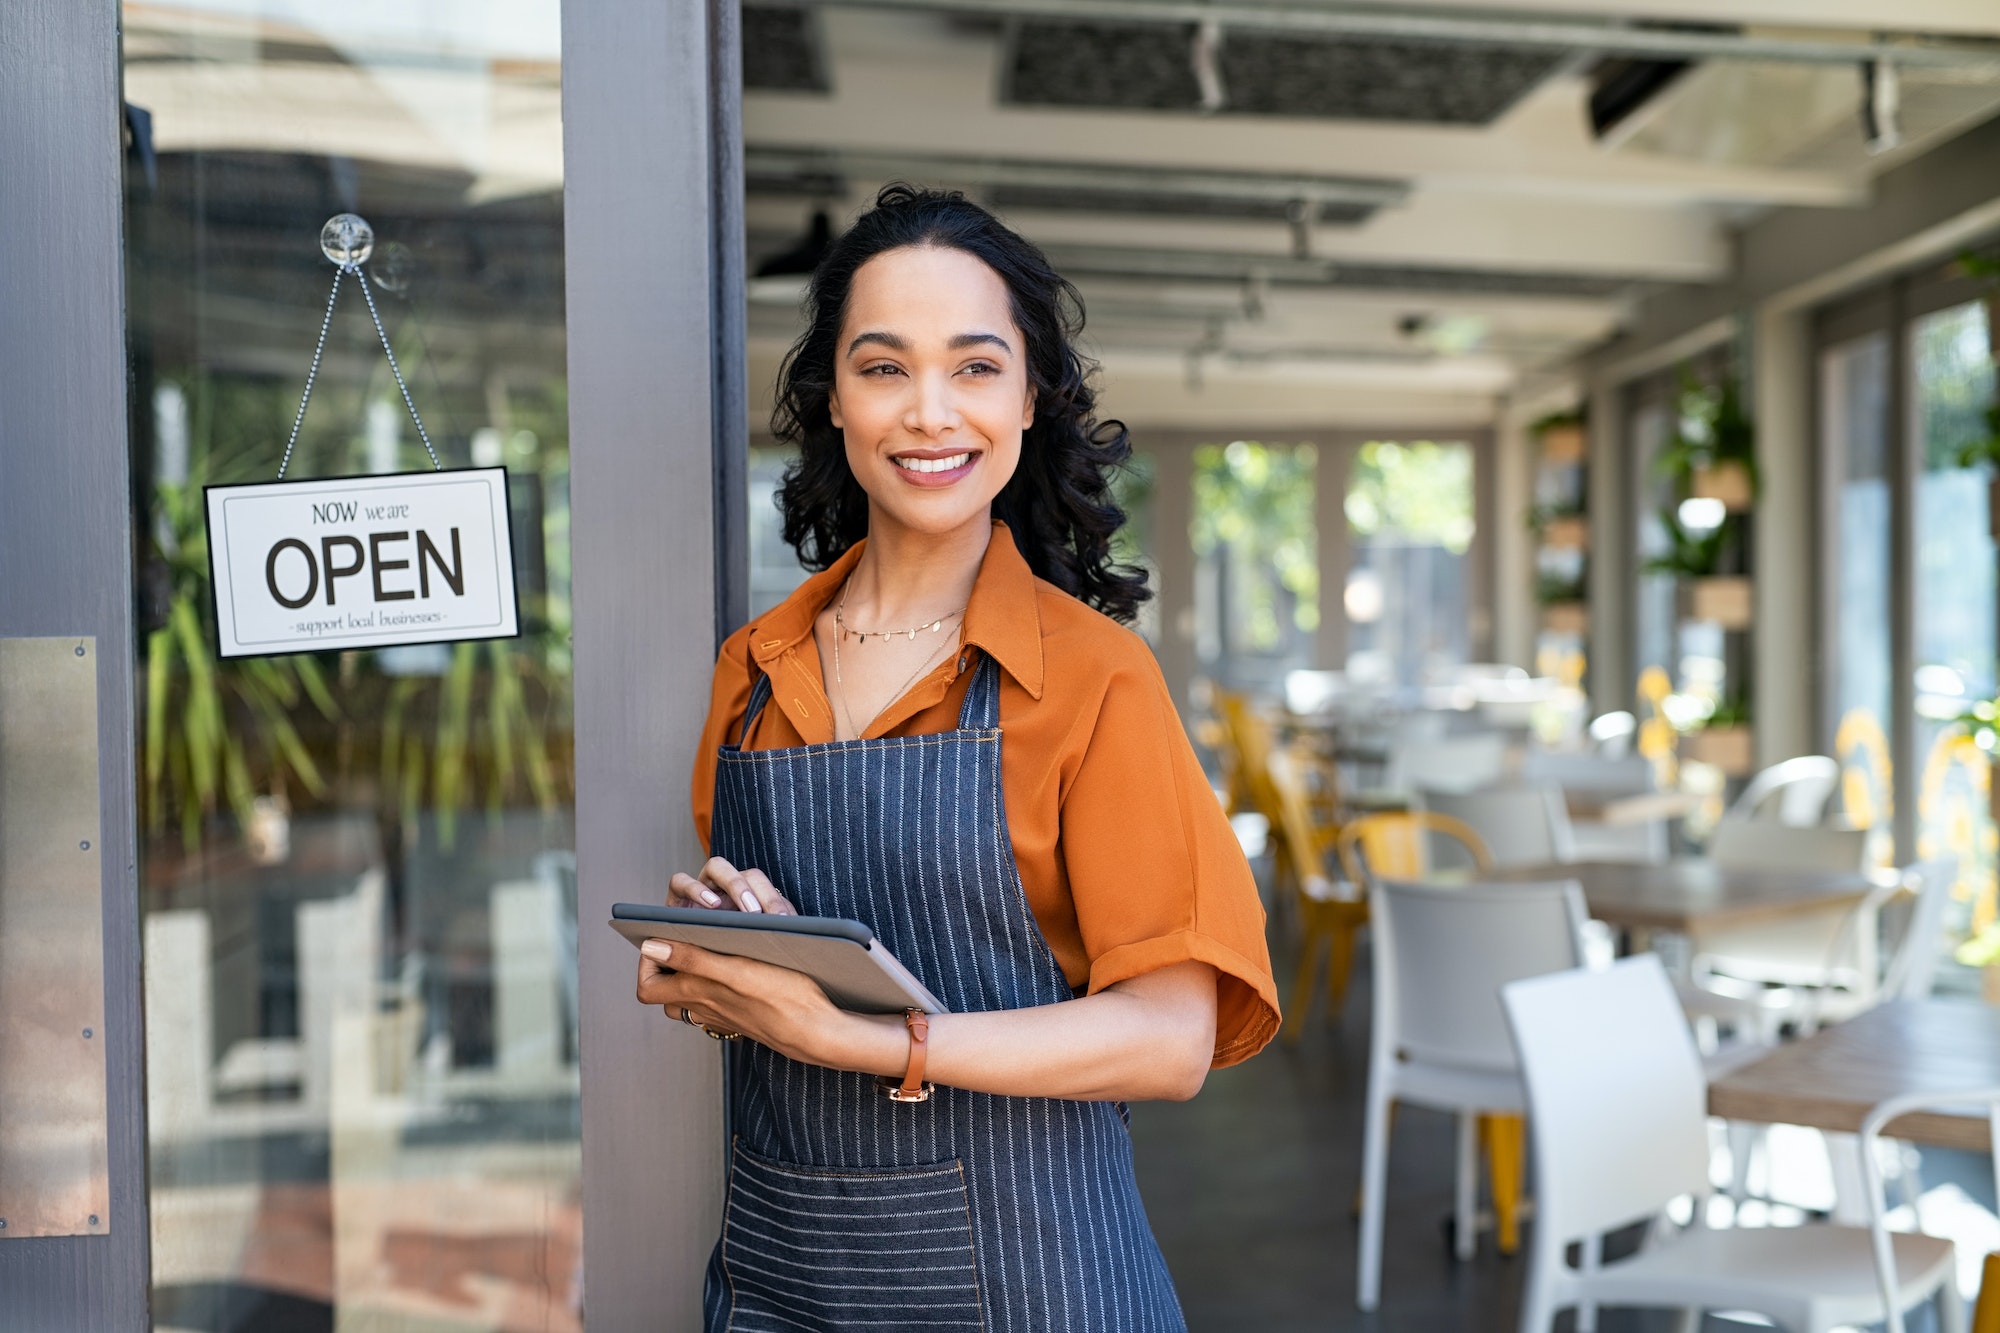 What small businesses can impact the economic growth